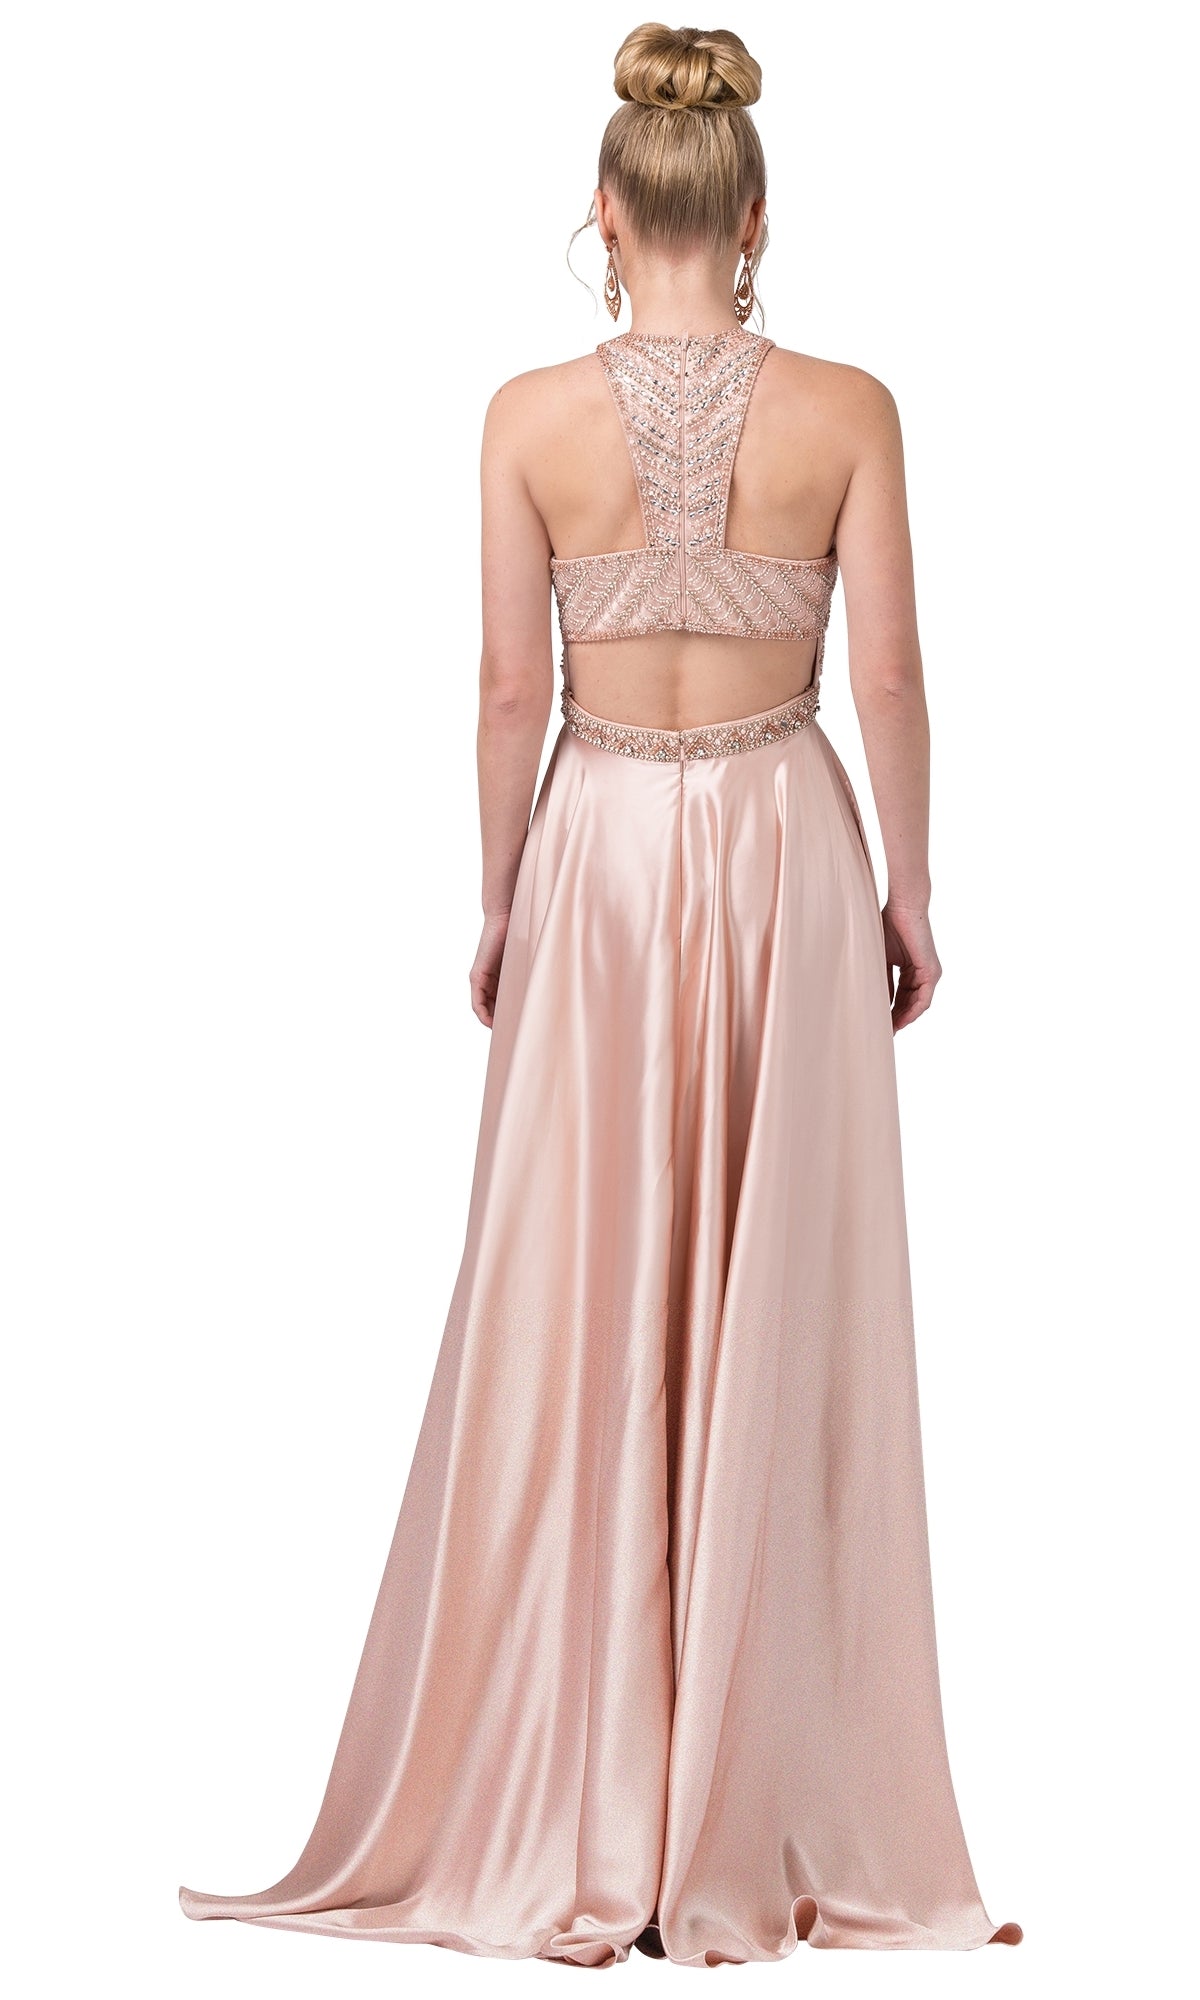  A-Line High-Neck Formal Dress with Beaded Bodice